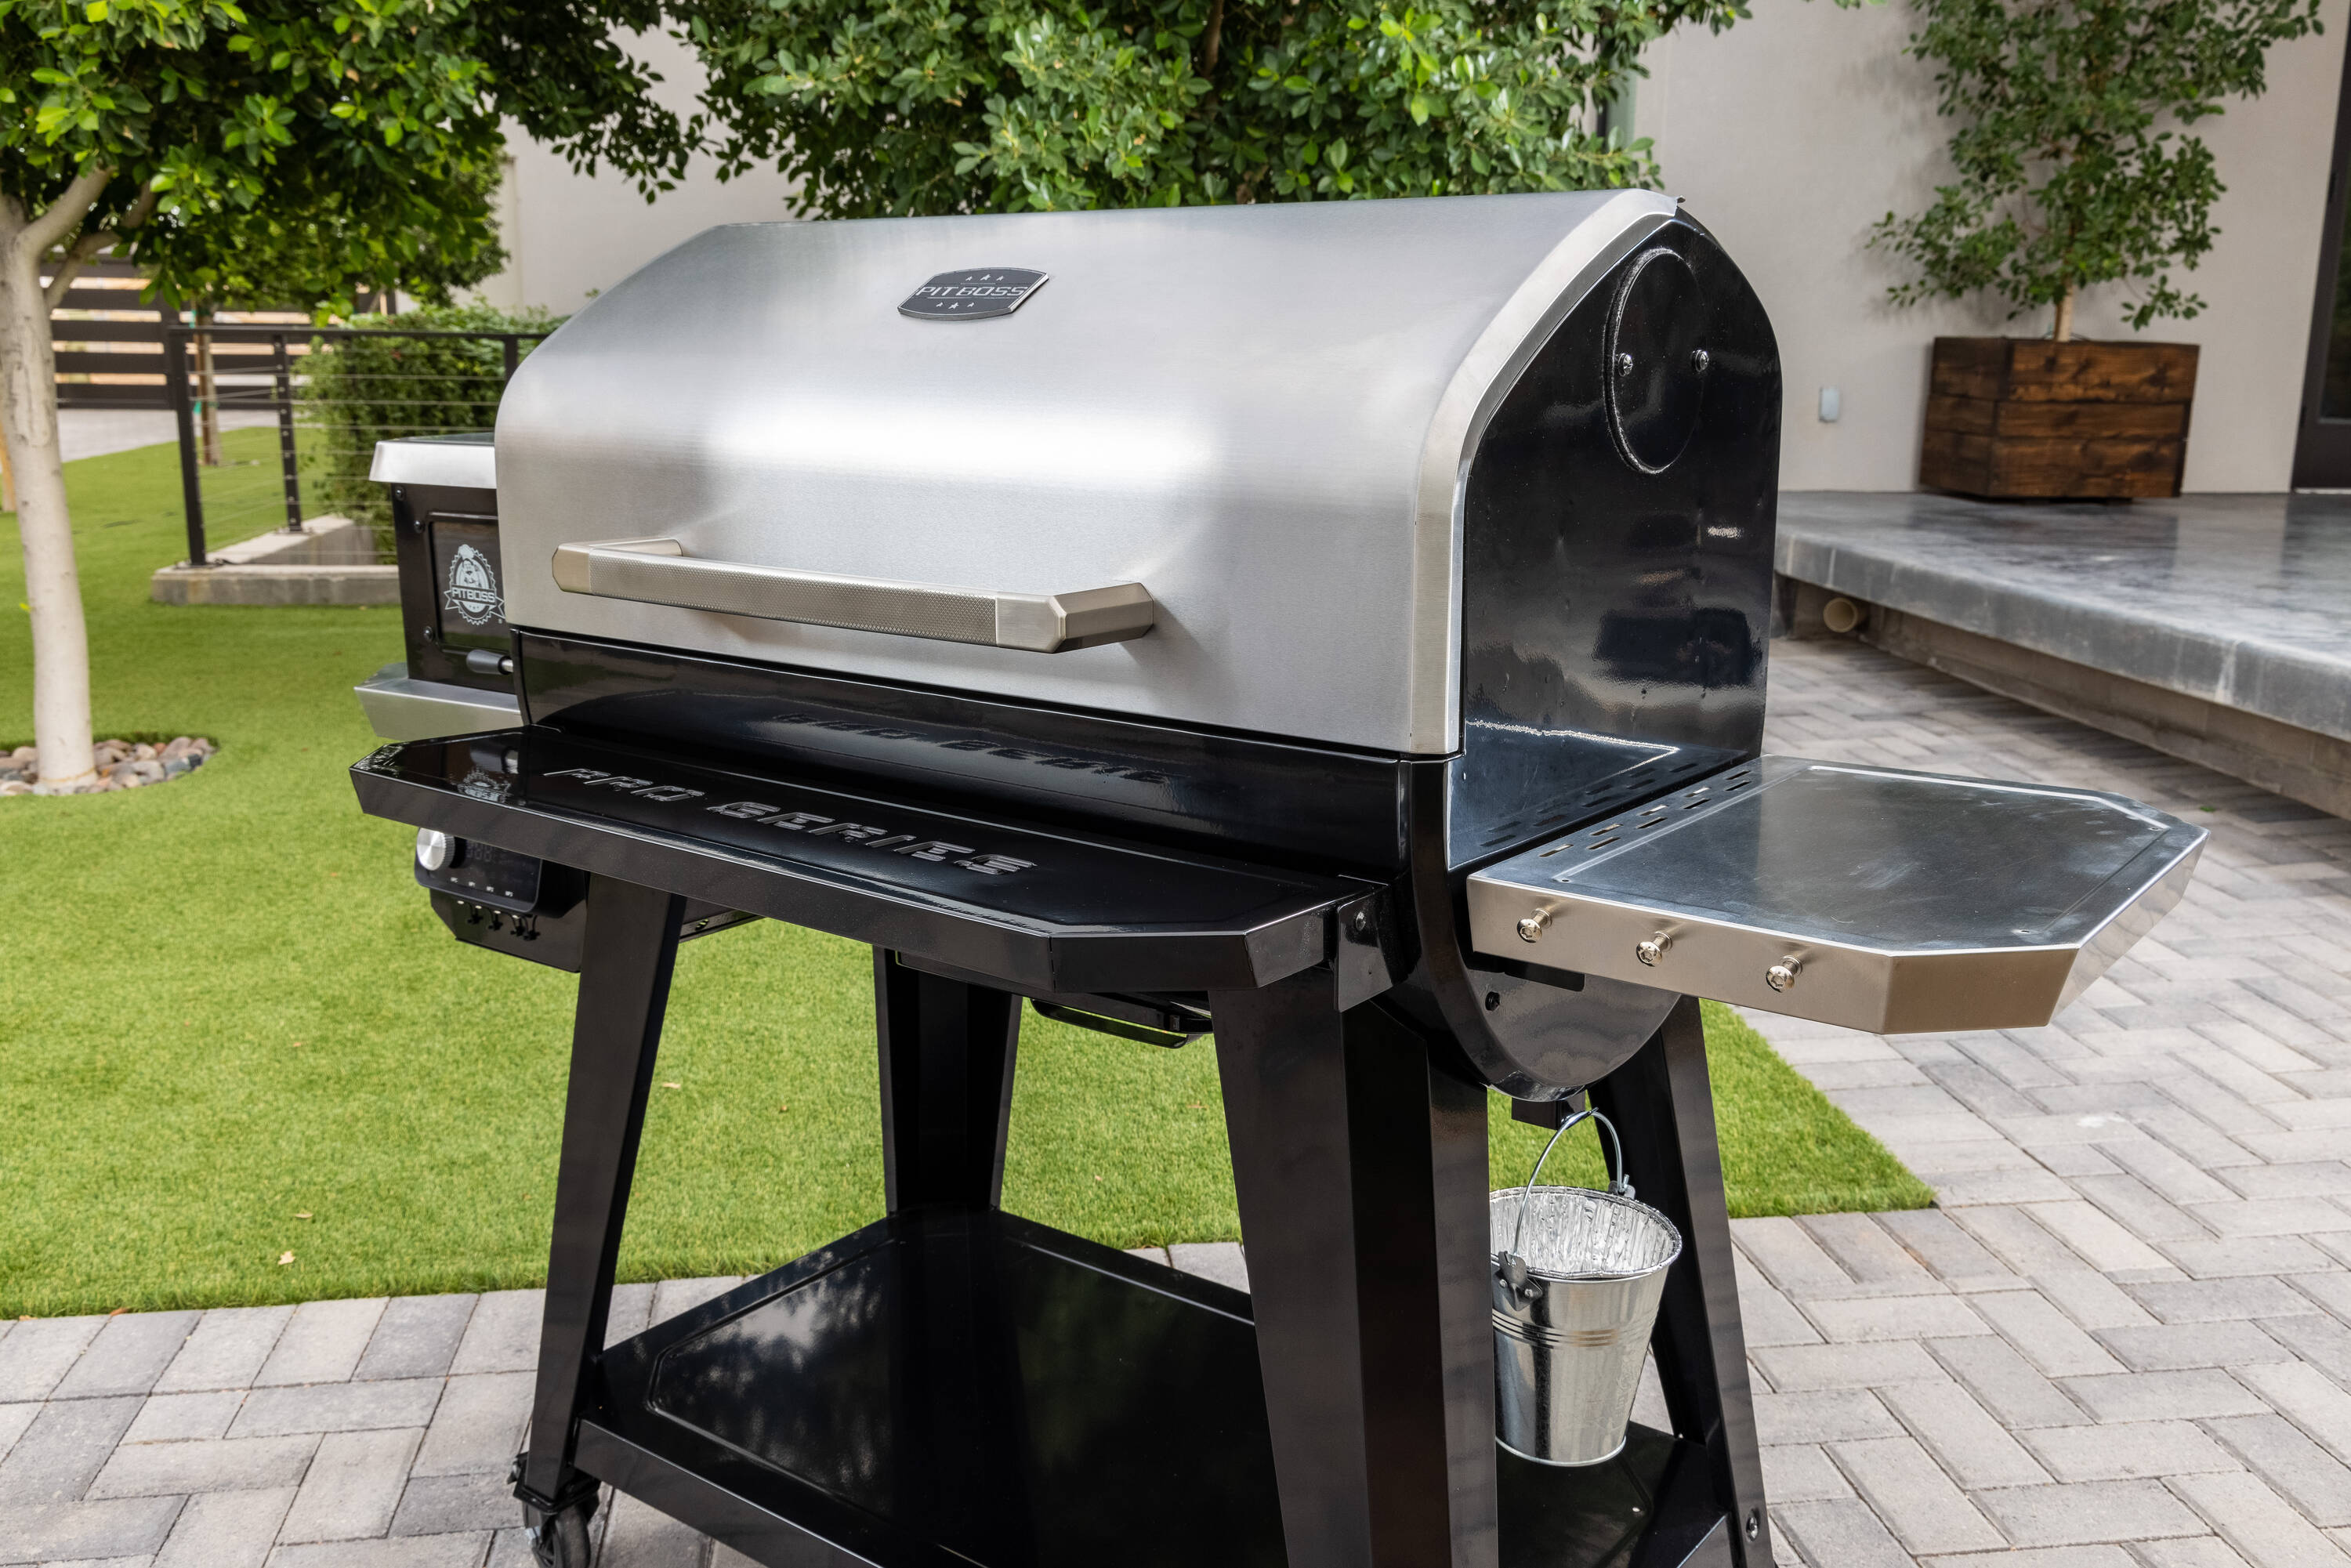 Pit Boss Pro Series 850-Sq Pellet Grill with Pit Boss Grill Cover &  Grilling Accessories